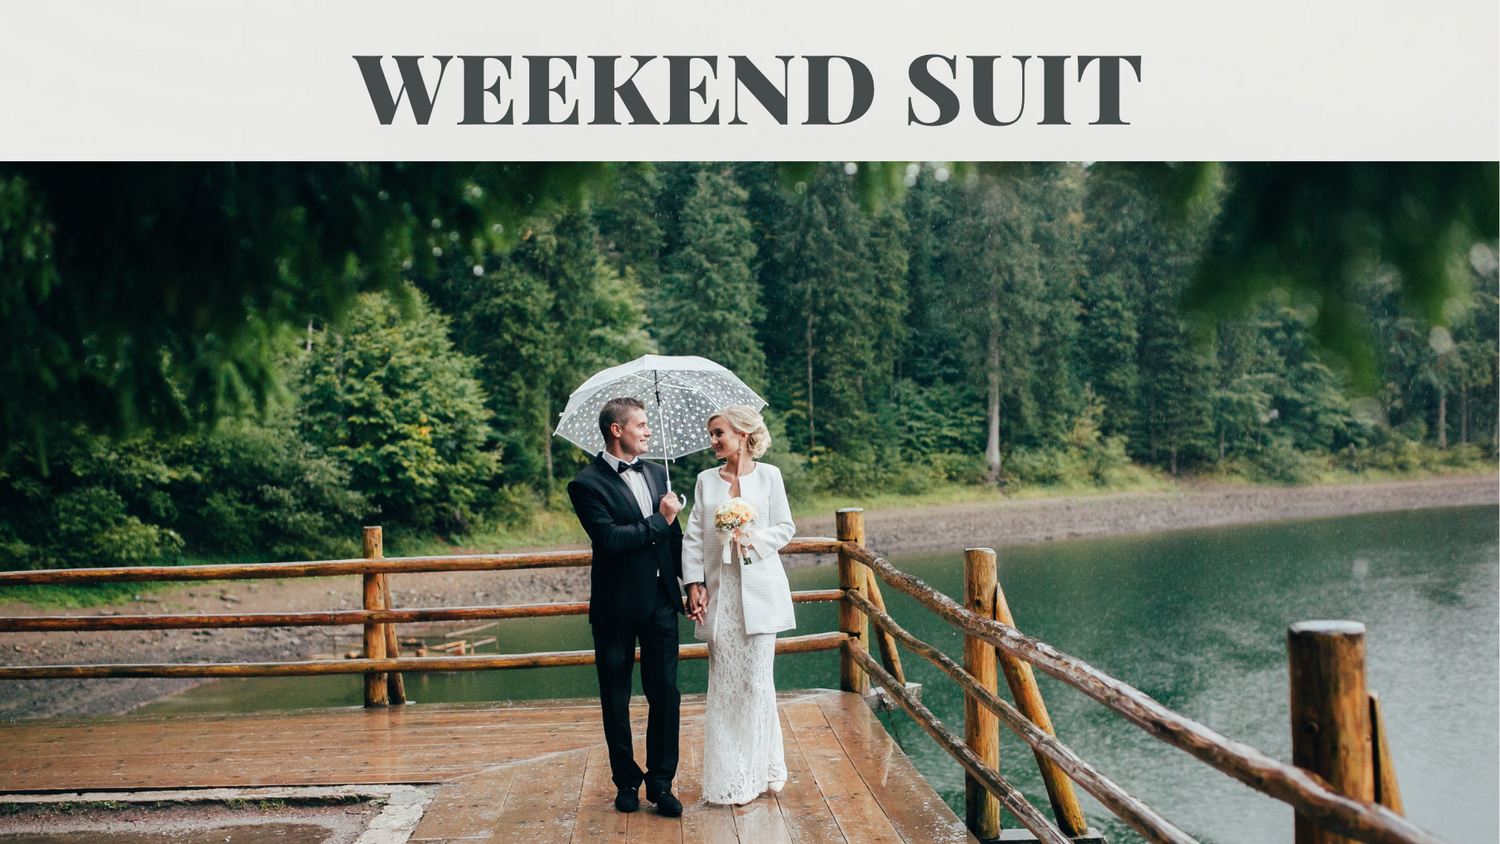 Dress to Impress: Elevate Your Style with Our Wedding Suit Collection